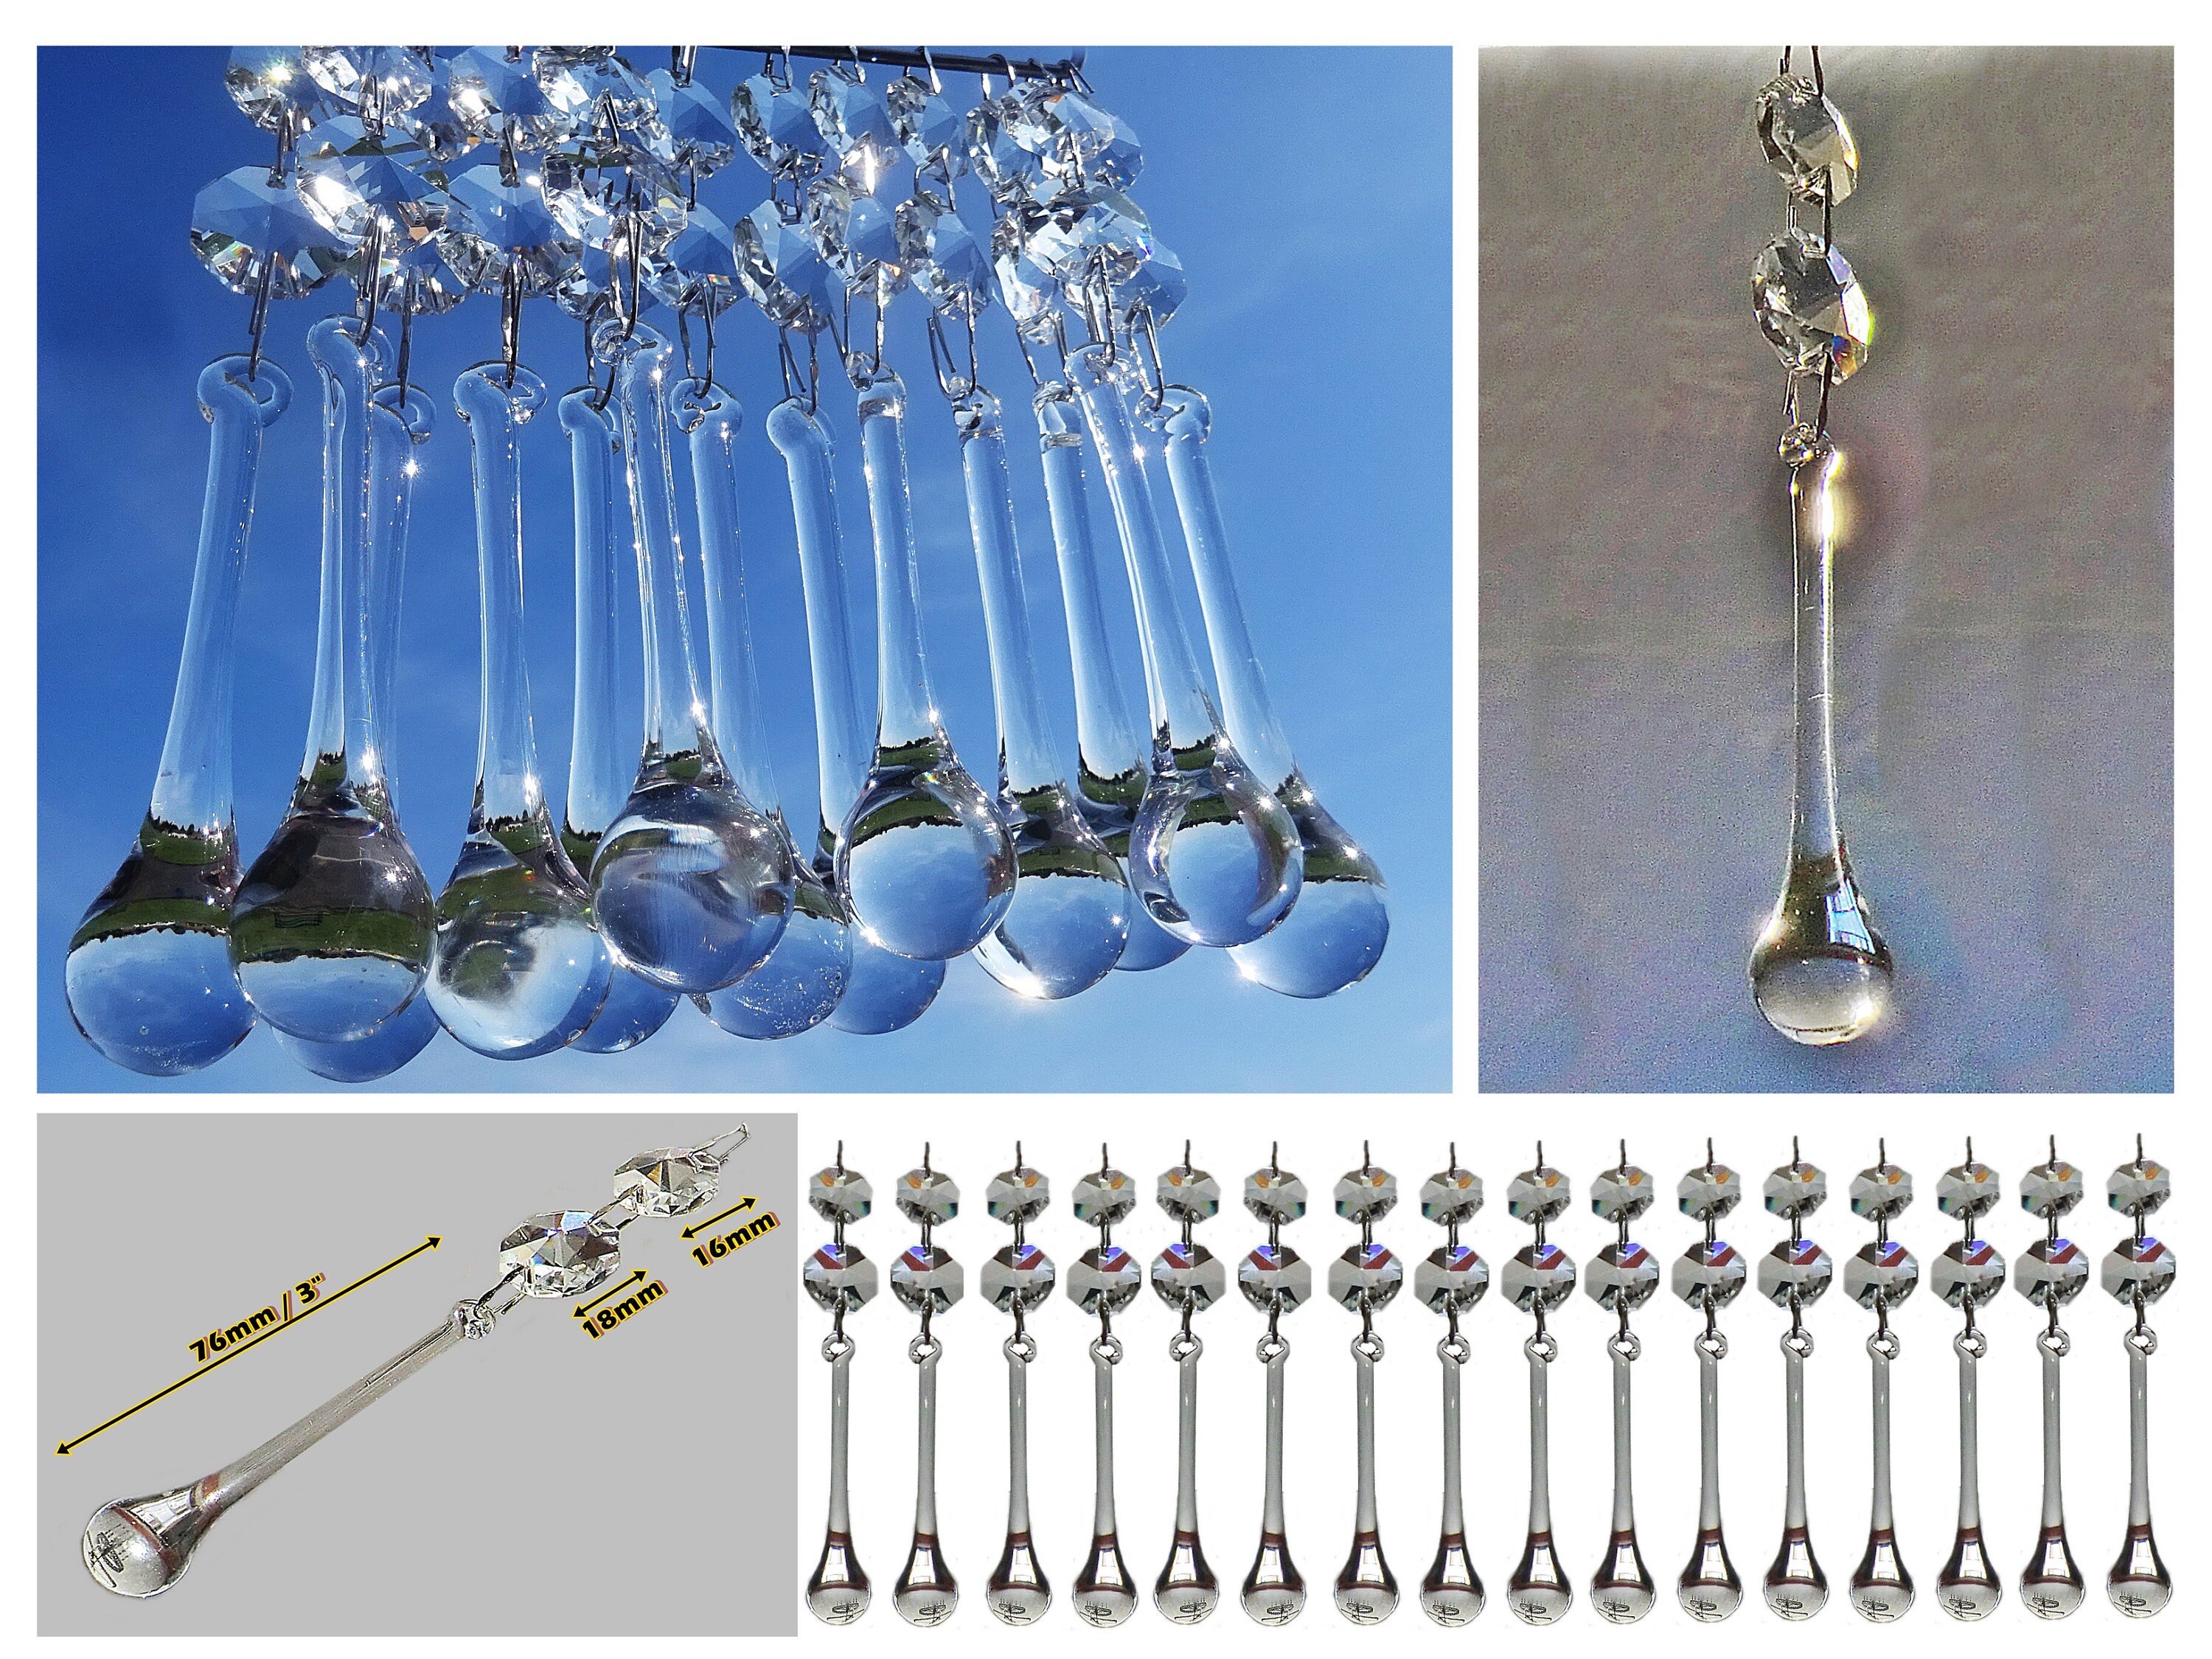 CHANDELIER GLASS CRYSTALS DROPS ANTIQUE AB DROPLETS ICICLE IRIDESCENT LAMP PARTS 